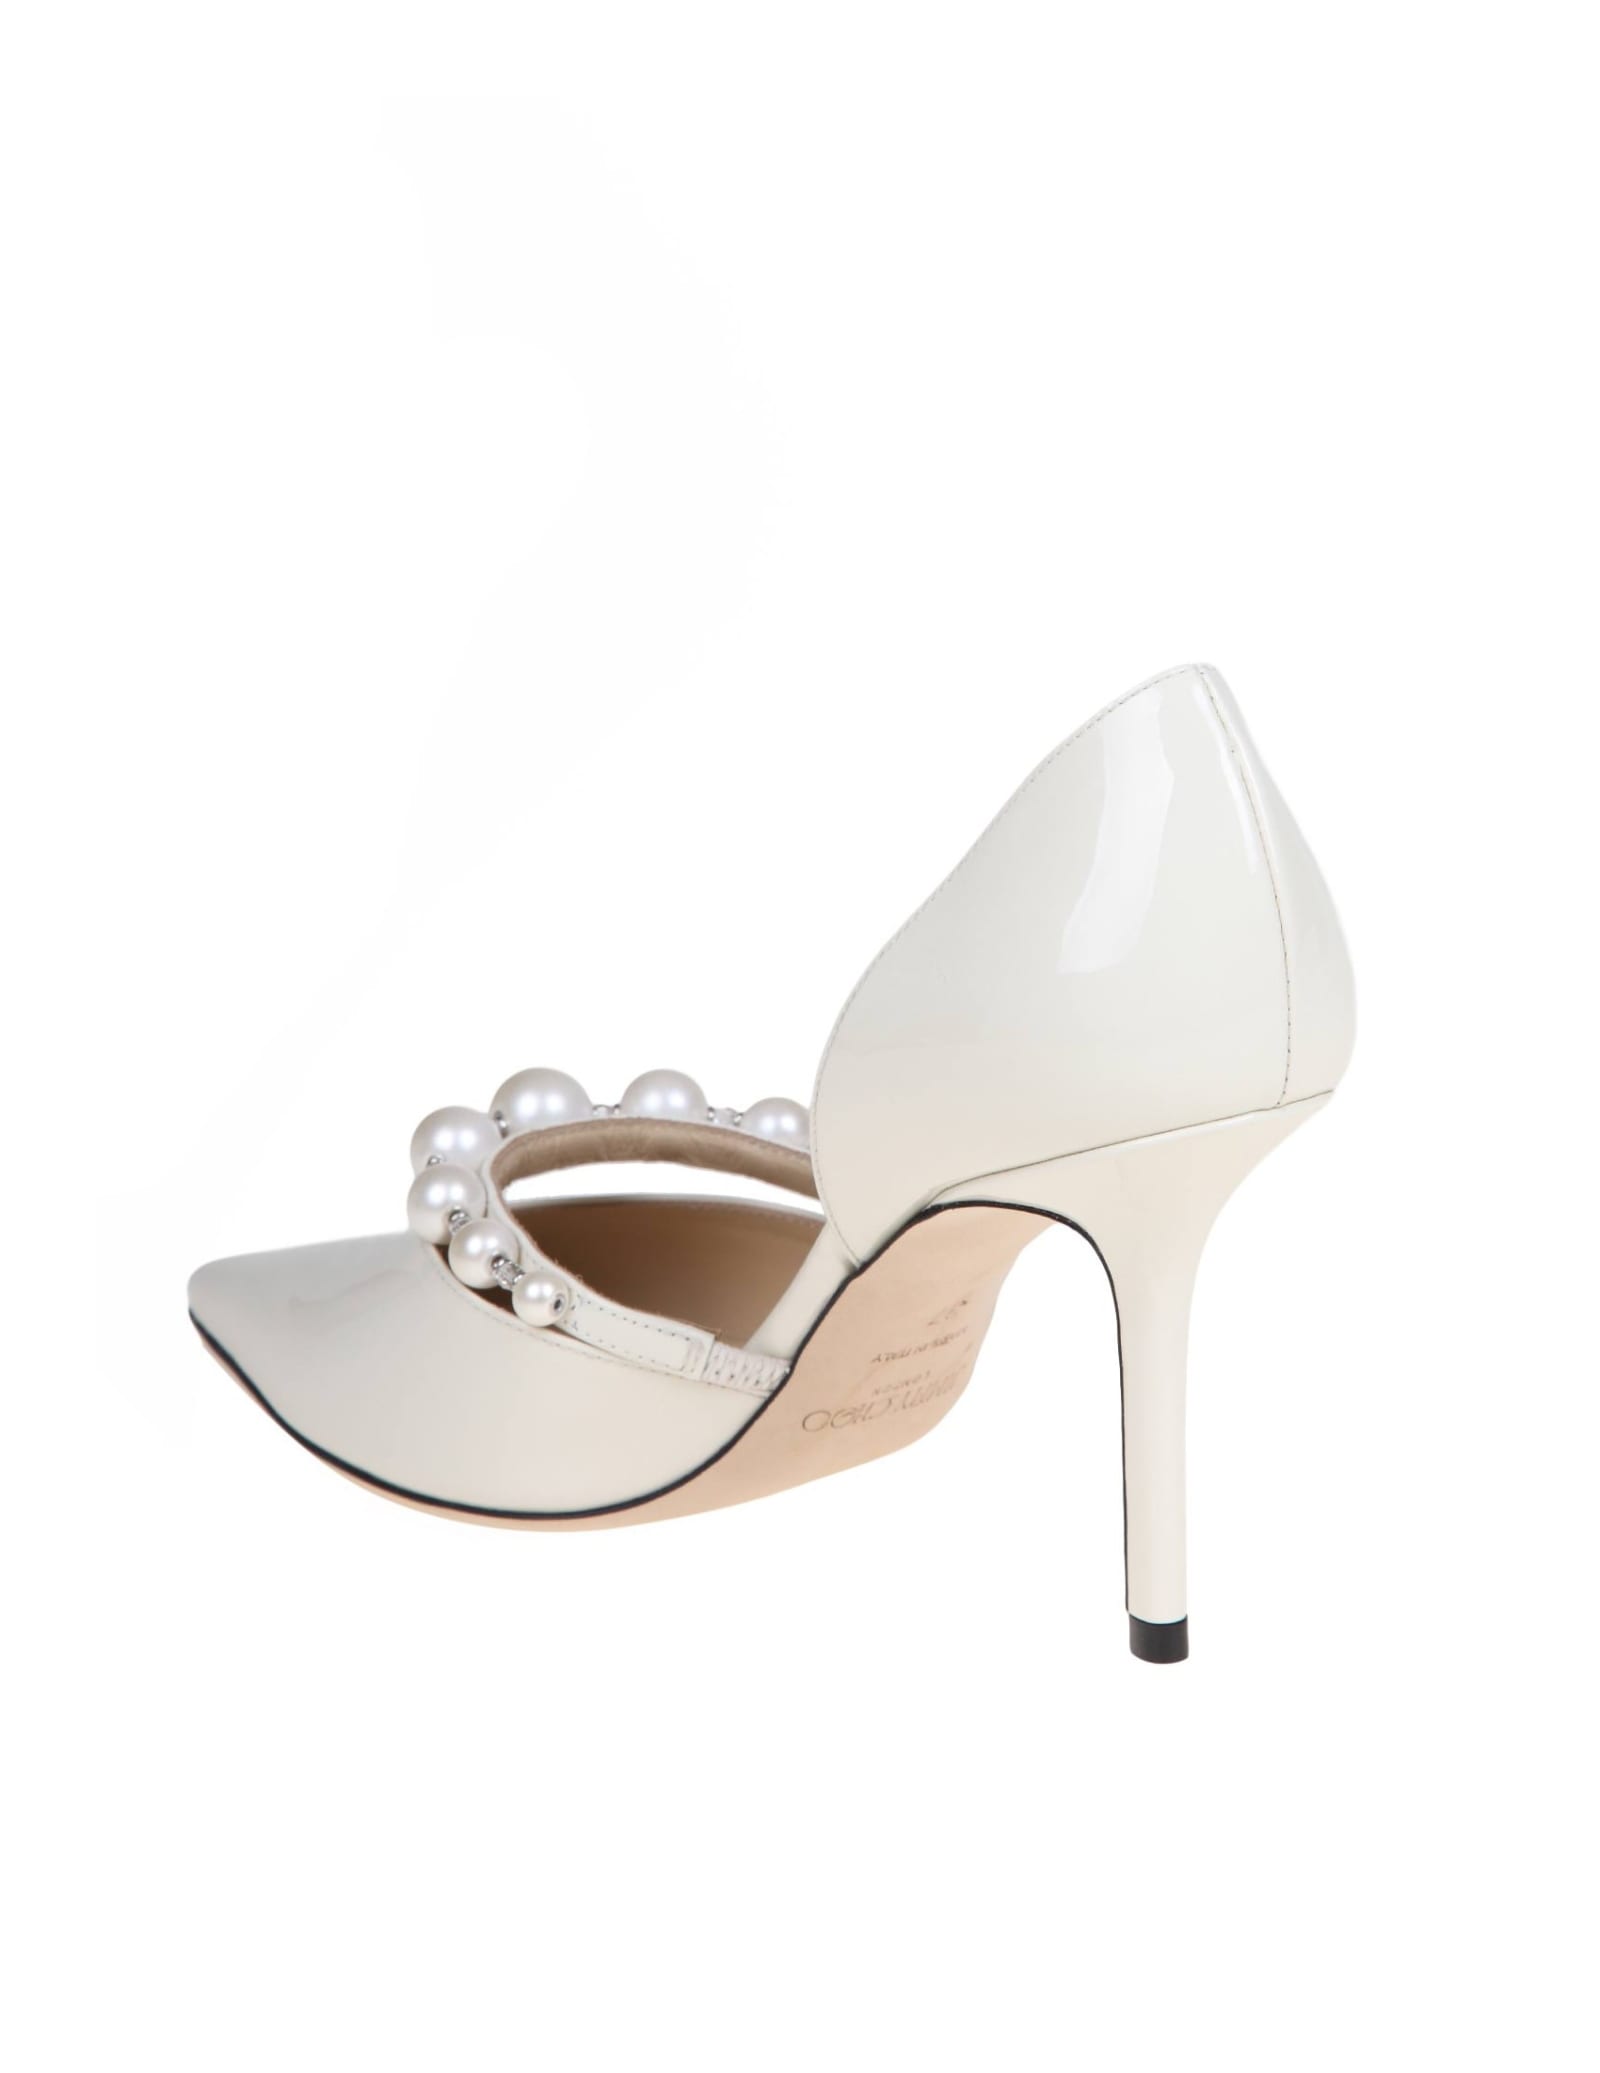 Shop Jimmy Choo Aurelie 85 Patent Leather Pumps With Applied Pearls